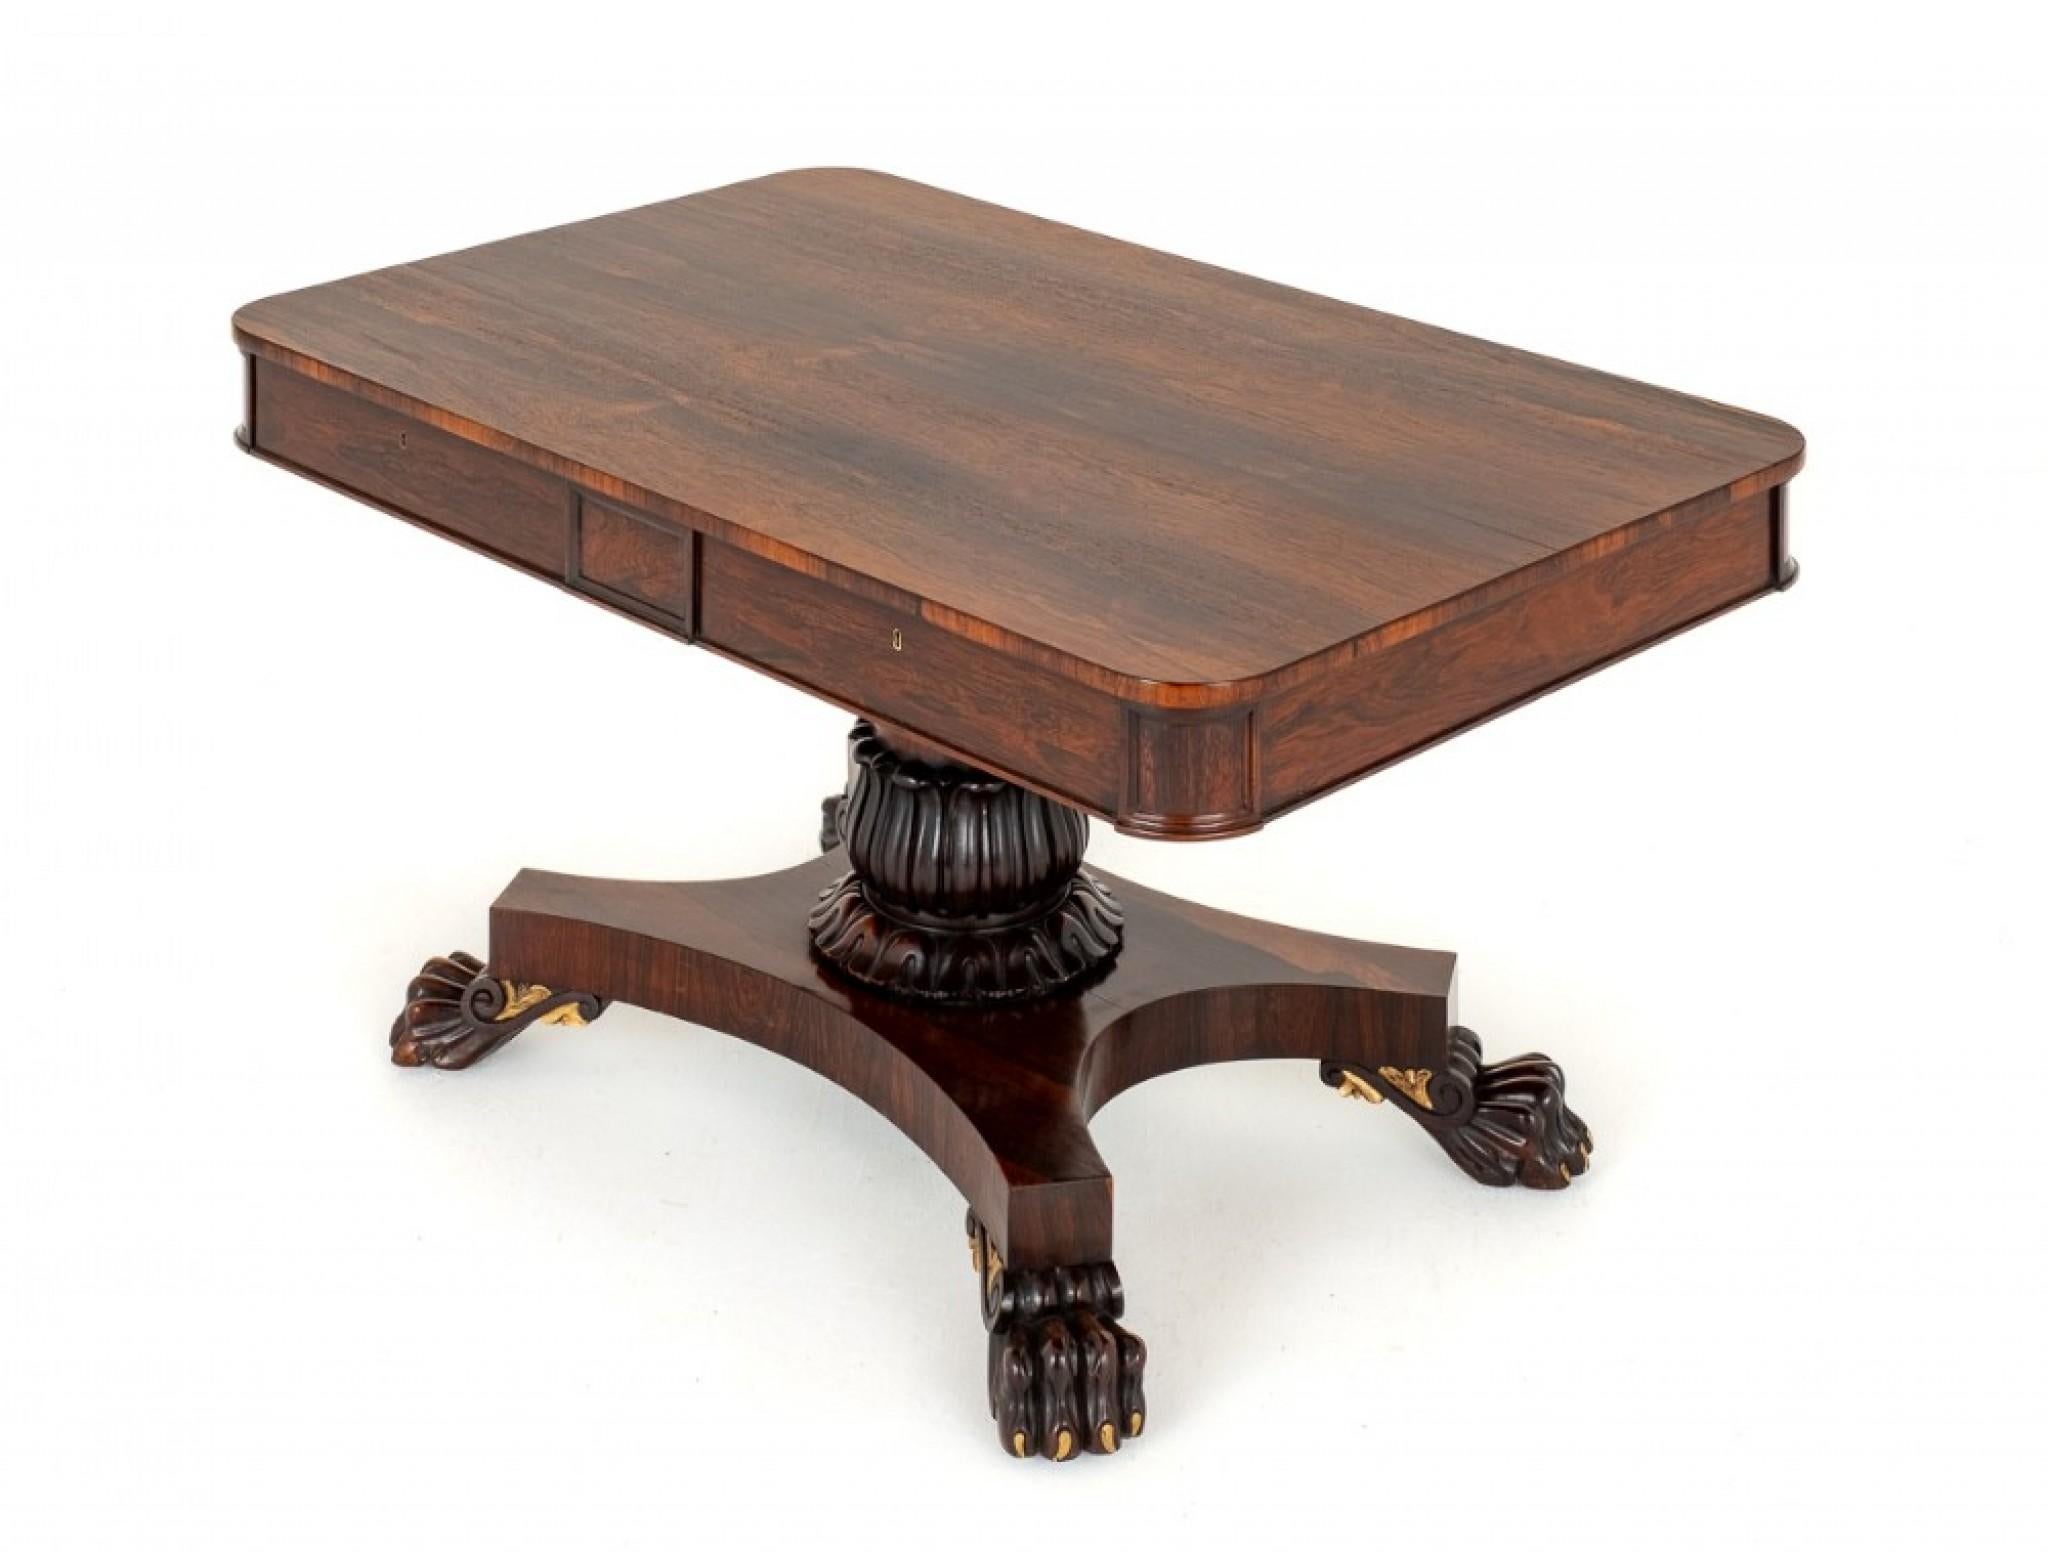 Regency Rosewood Library Table.
This Library Table Stands Upon a Platform Base with Boldly Carved Lions Paw Feet.
The Column Being of a Carved Form.
Period Regency
The Table Features 4 Mahogany Lined Drawers.
The Top of the Table Having Matched Rio